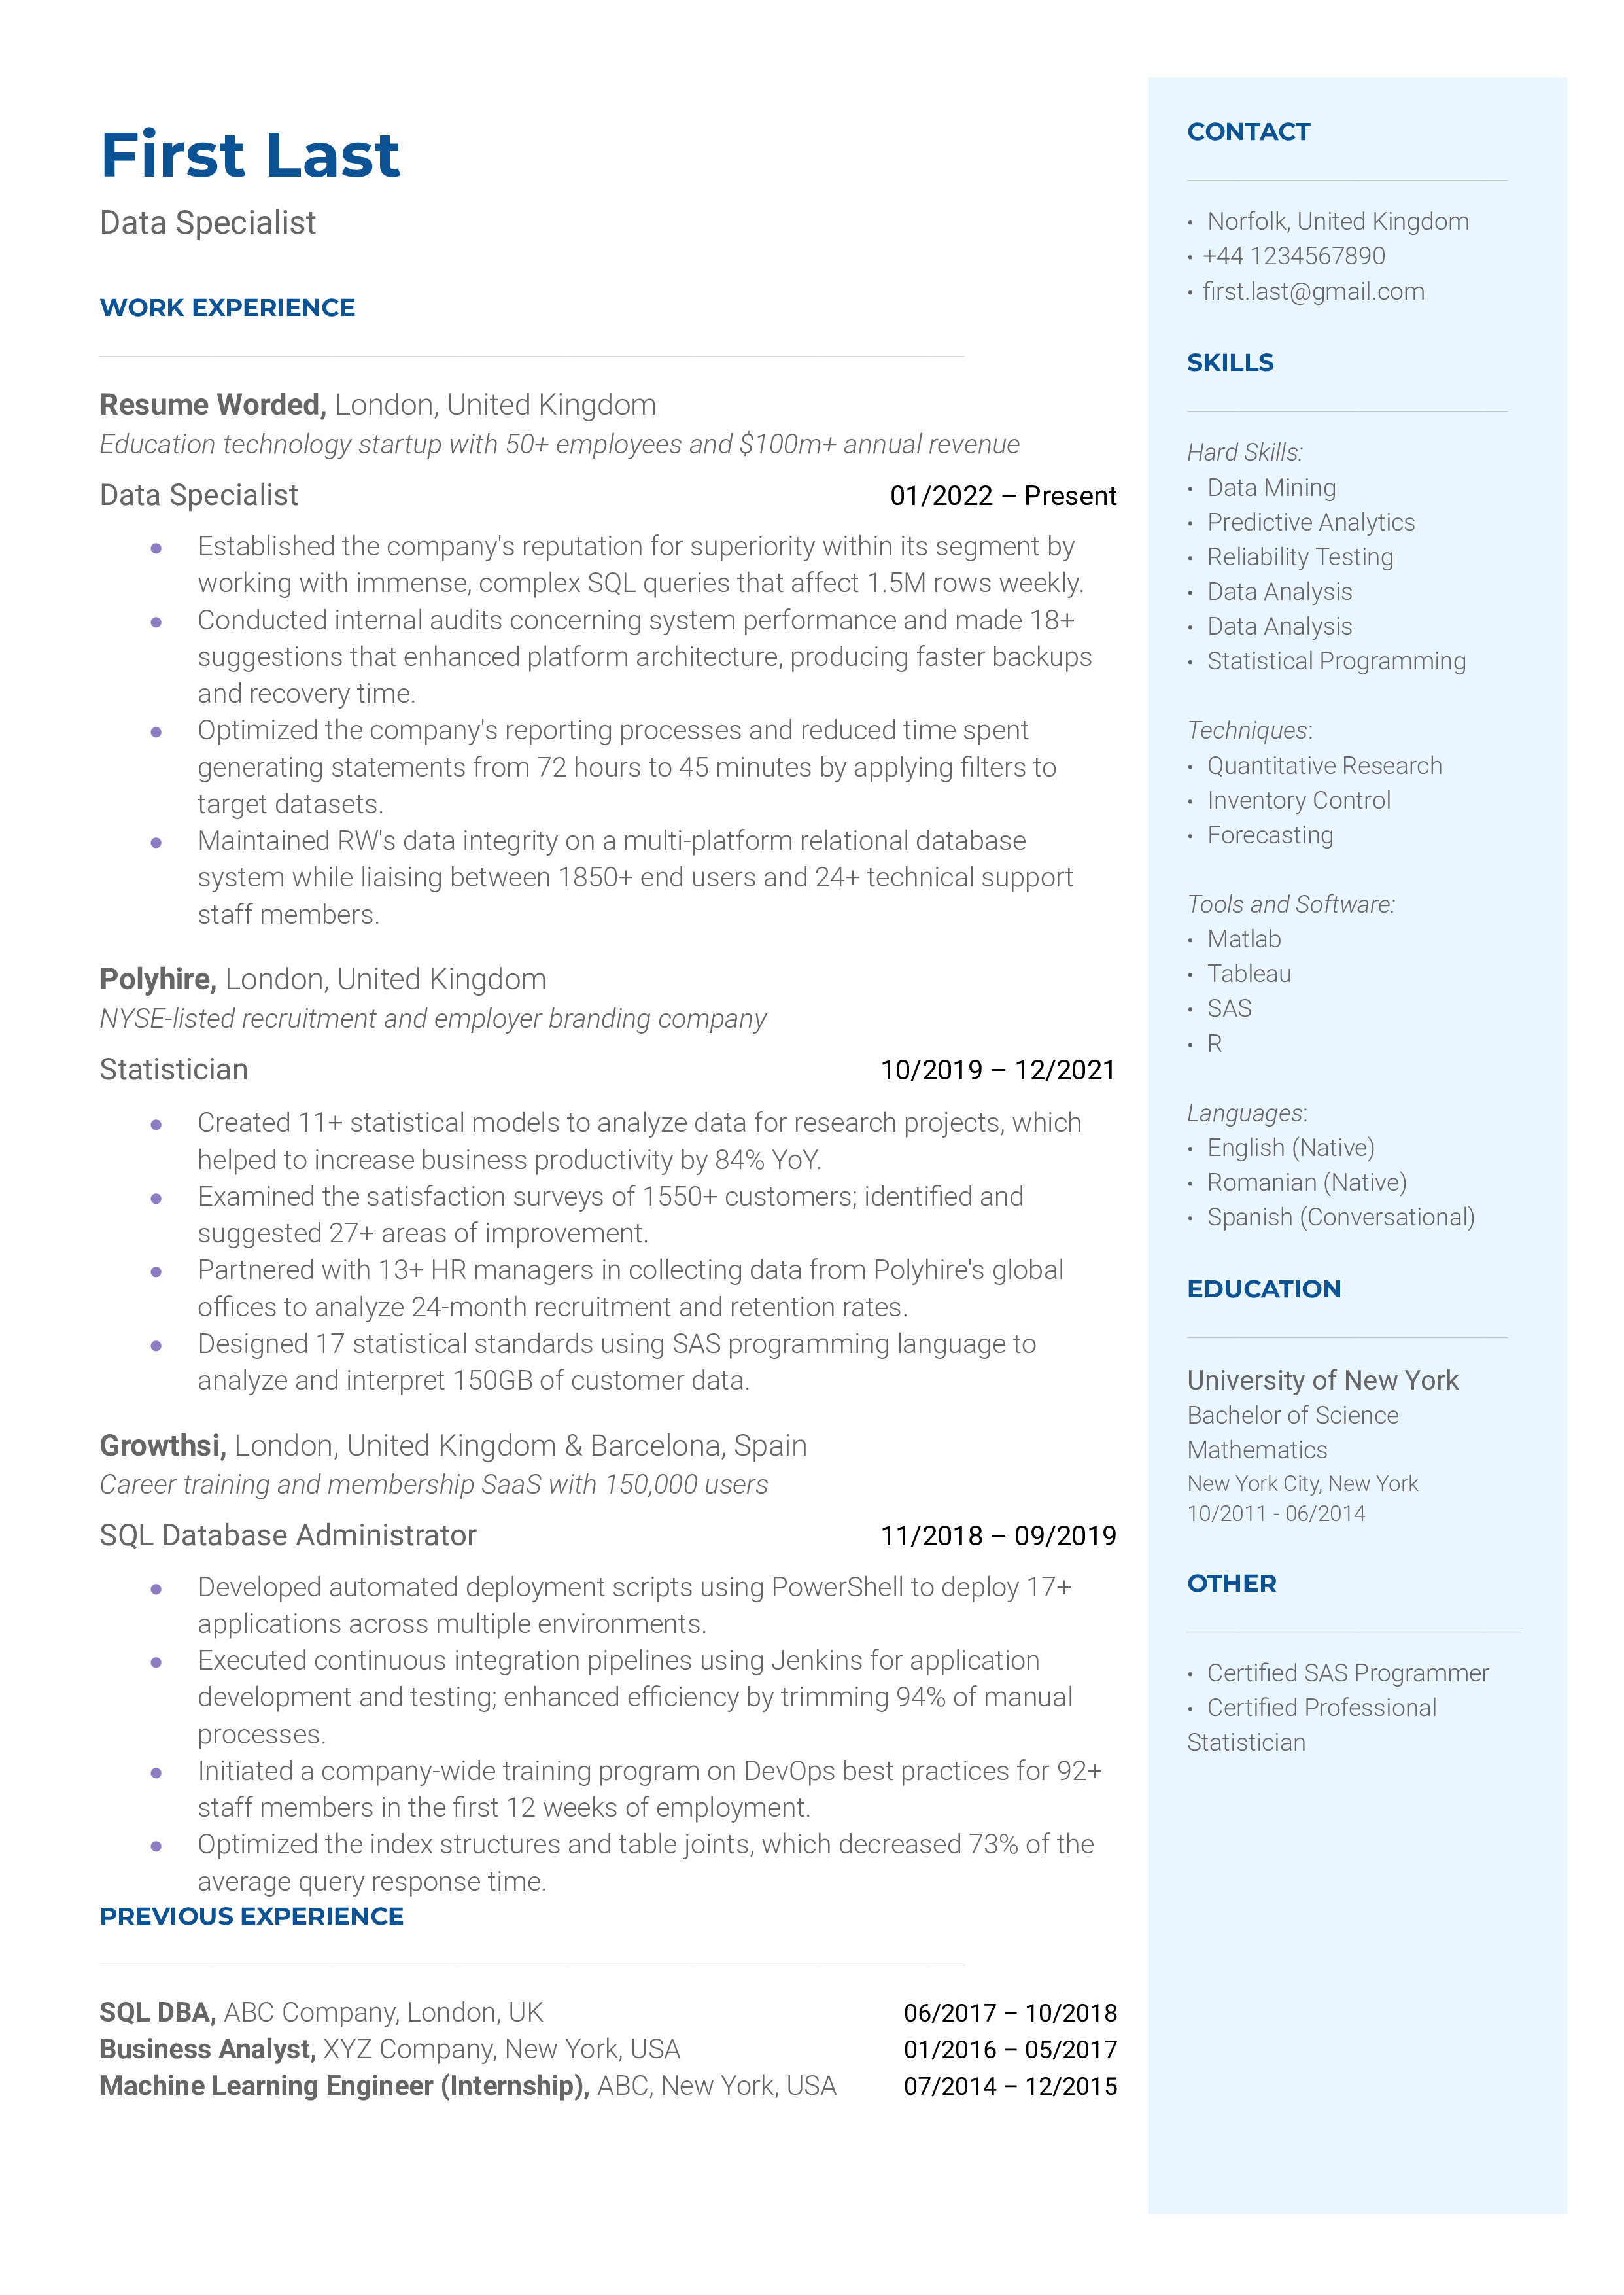 A data specialist resume template highlighting achievements.